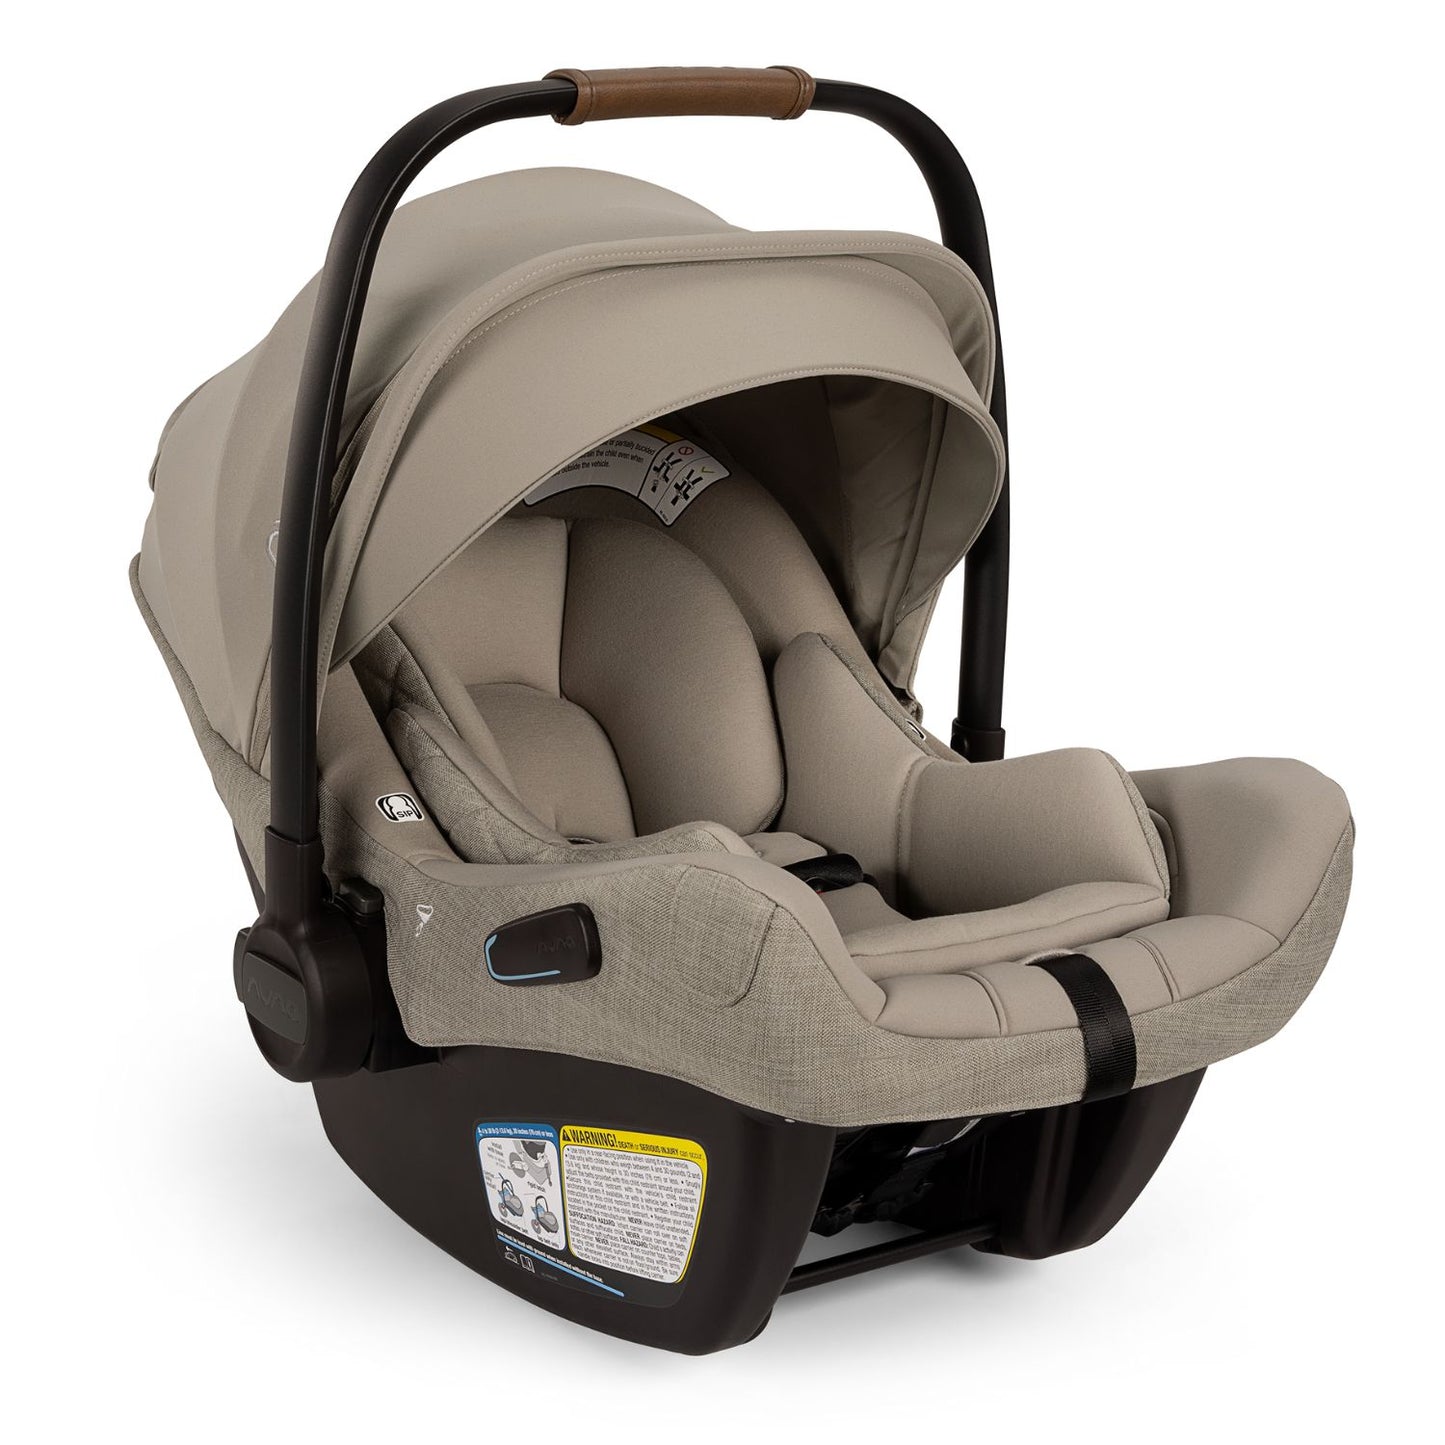 Nuna PIPA Aire RX Infant Car Seat with RELX Base - Hazelwood